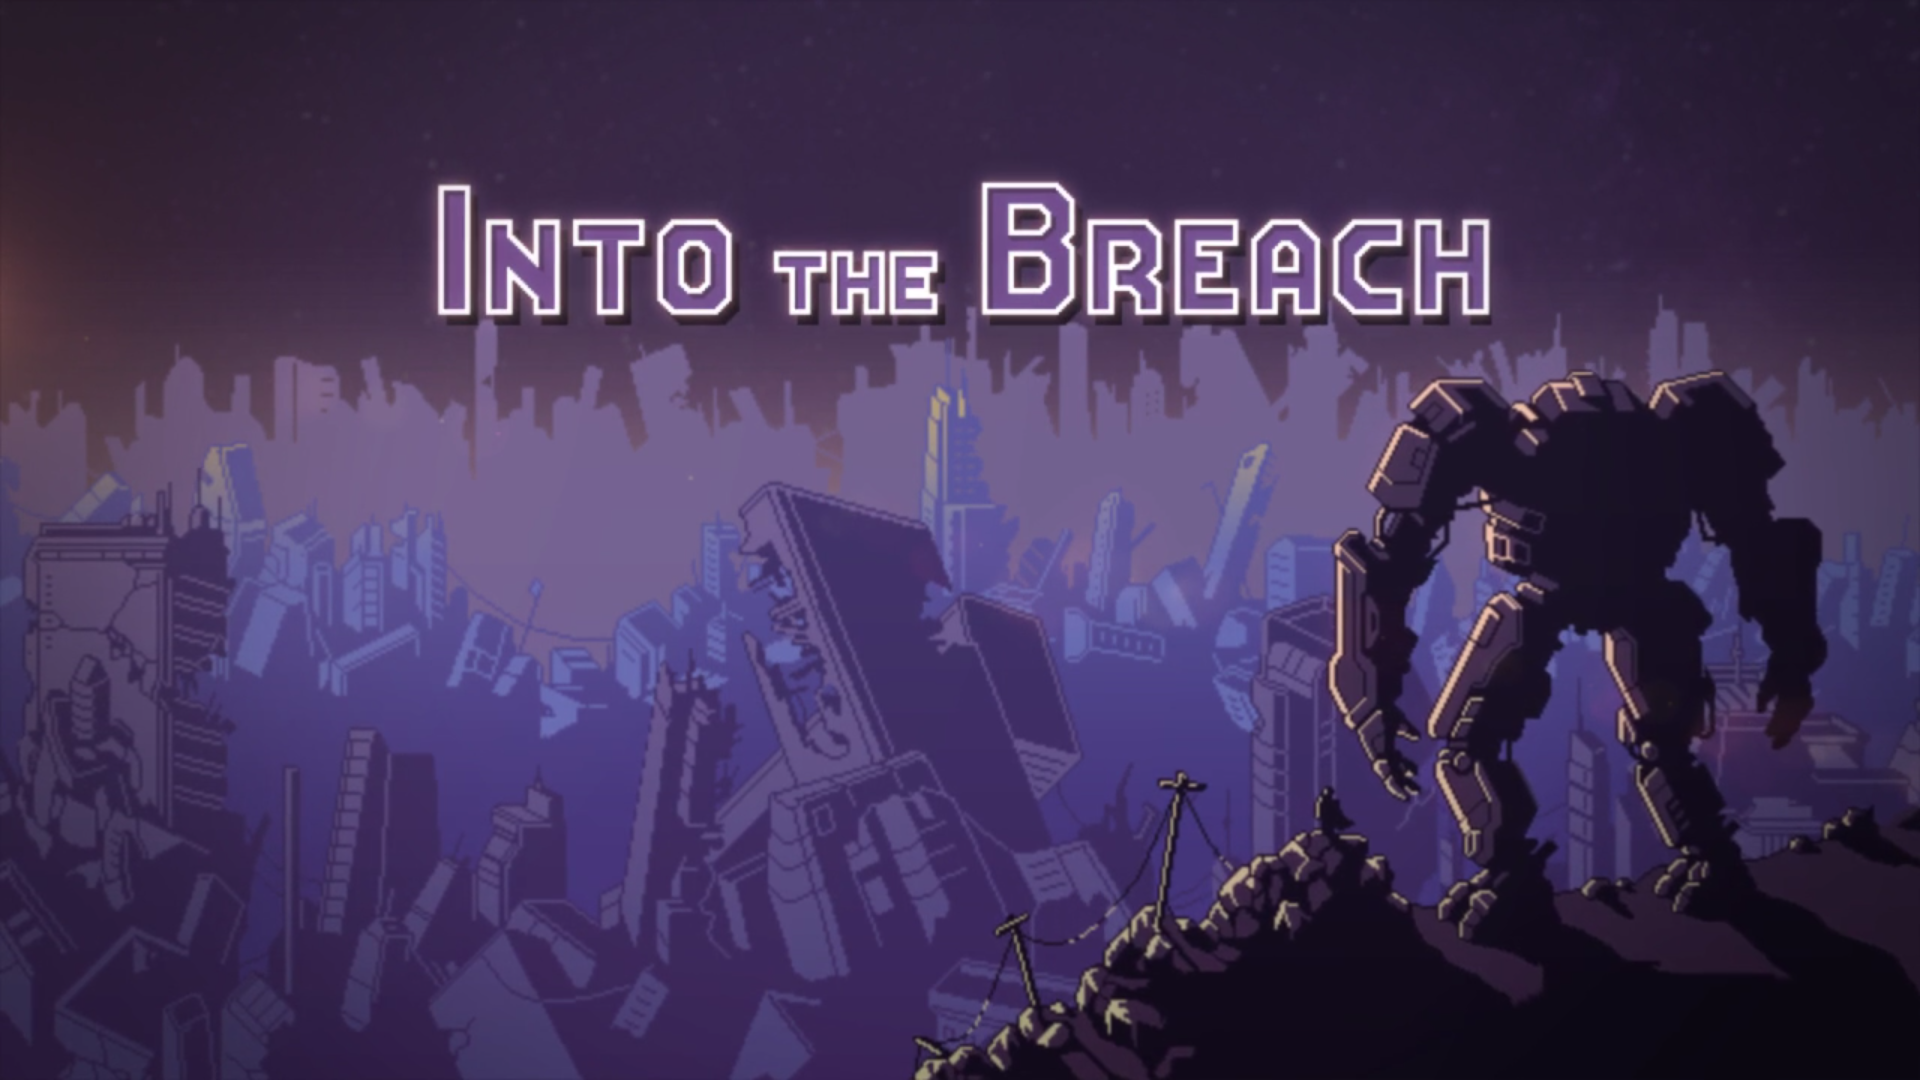 Image for The making of Into the Breach: how Subset Games stripped back to the essentials